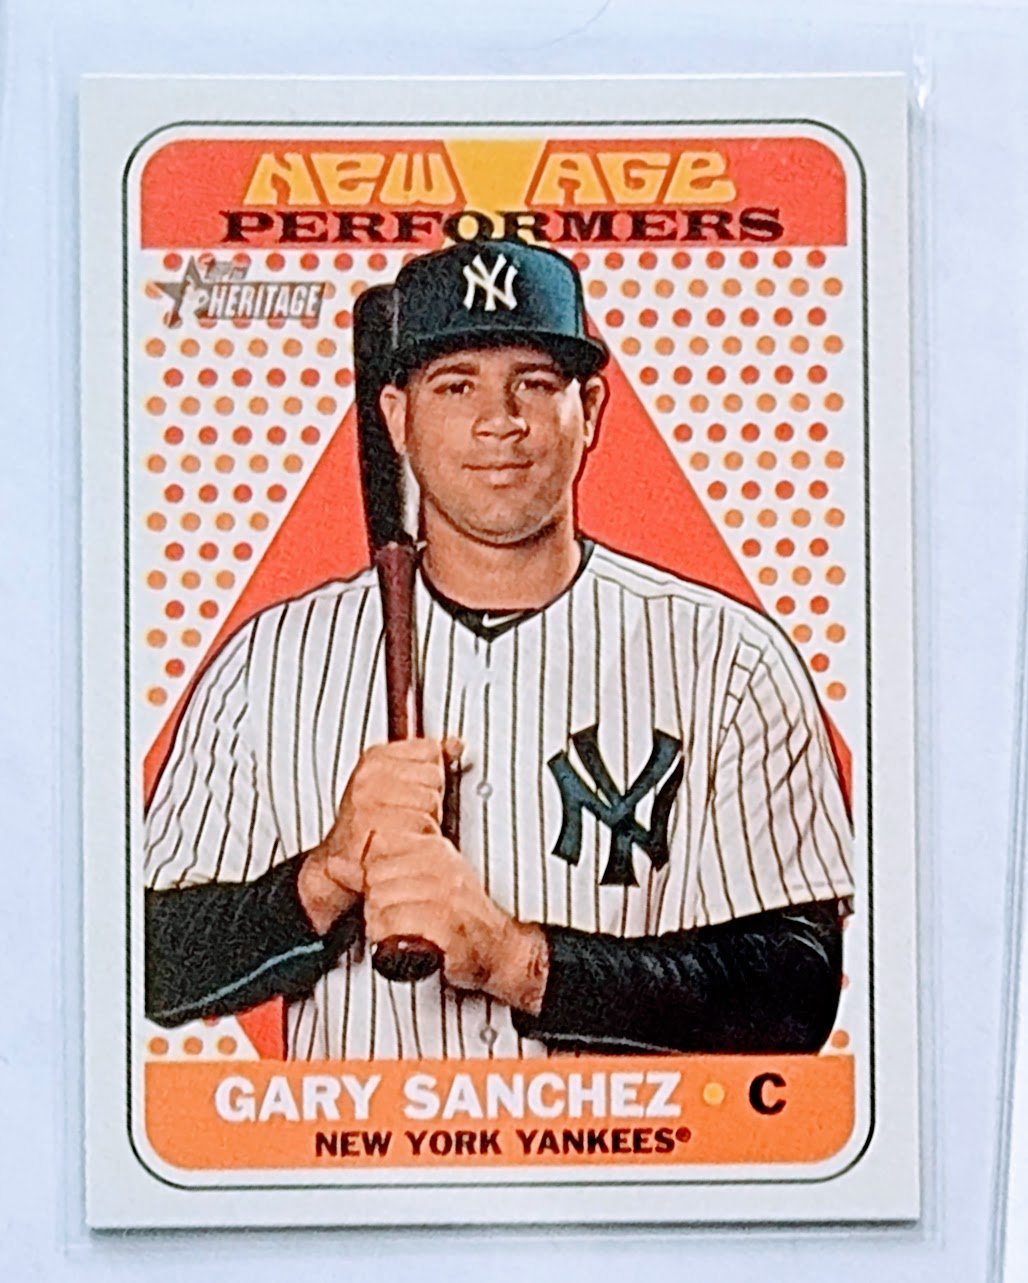 2018 Topps Heritage Gary Sanchez New Age Performers Insert Baseball Card TPTV simple Xclusive Collectibles   